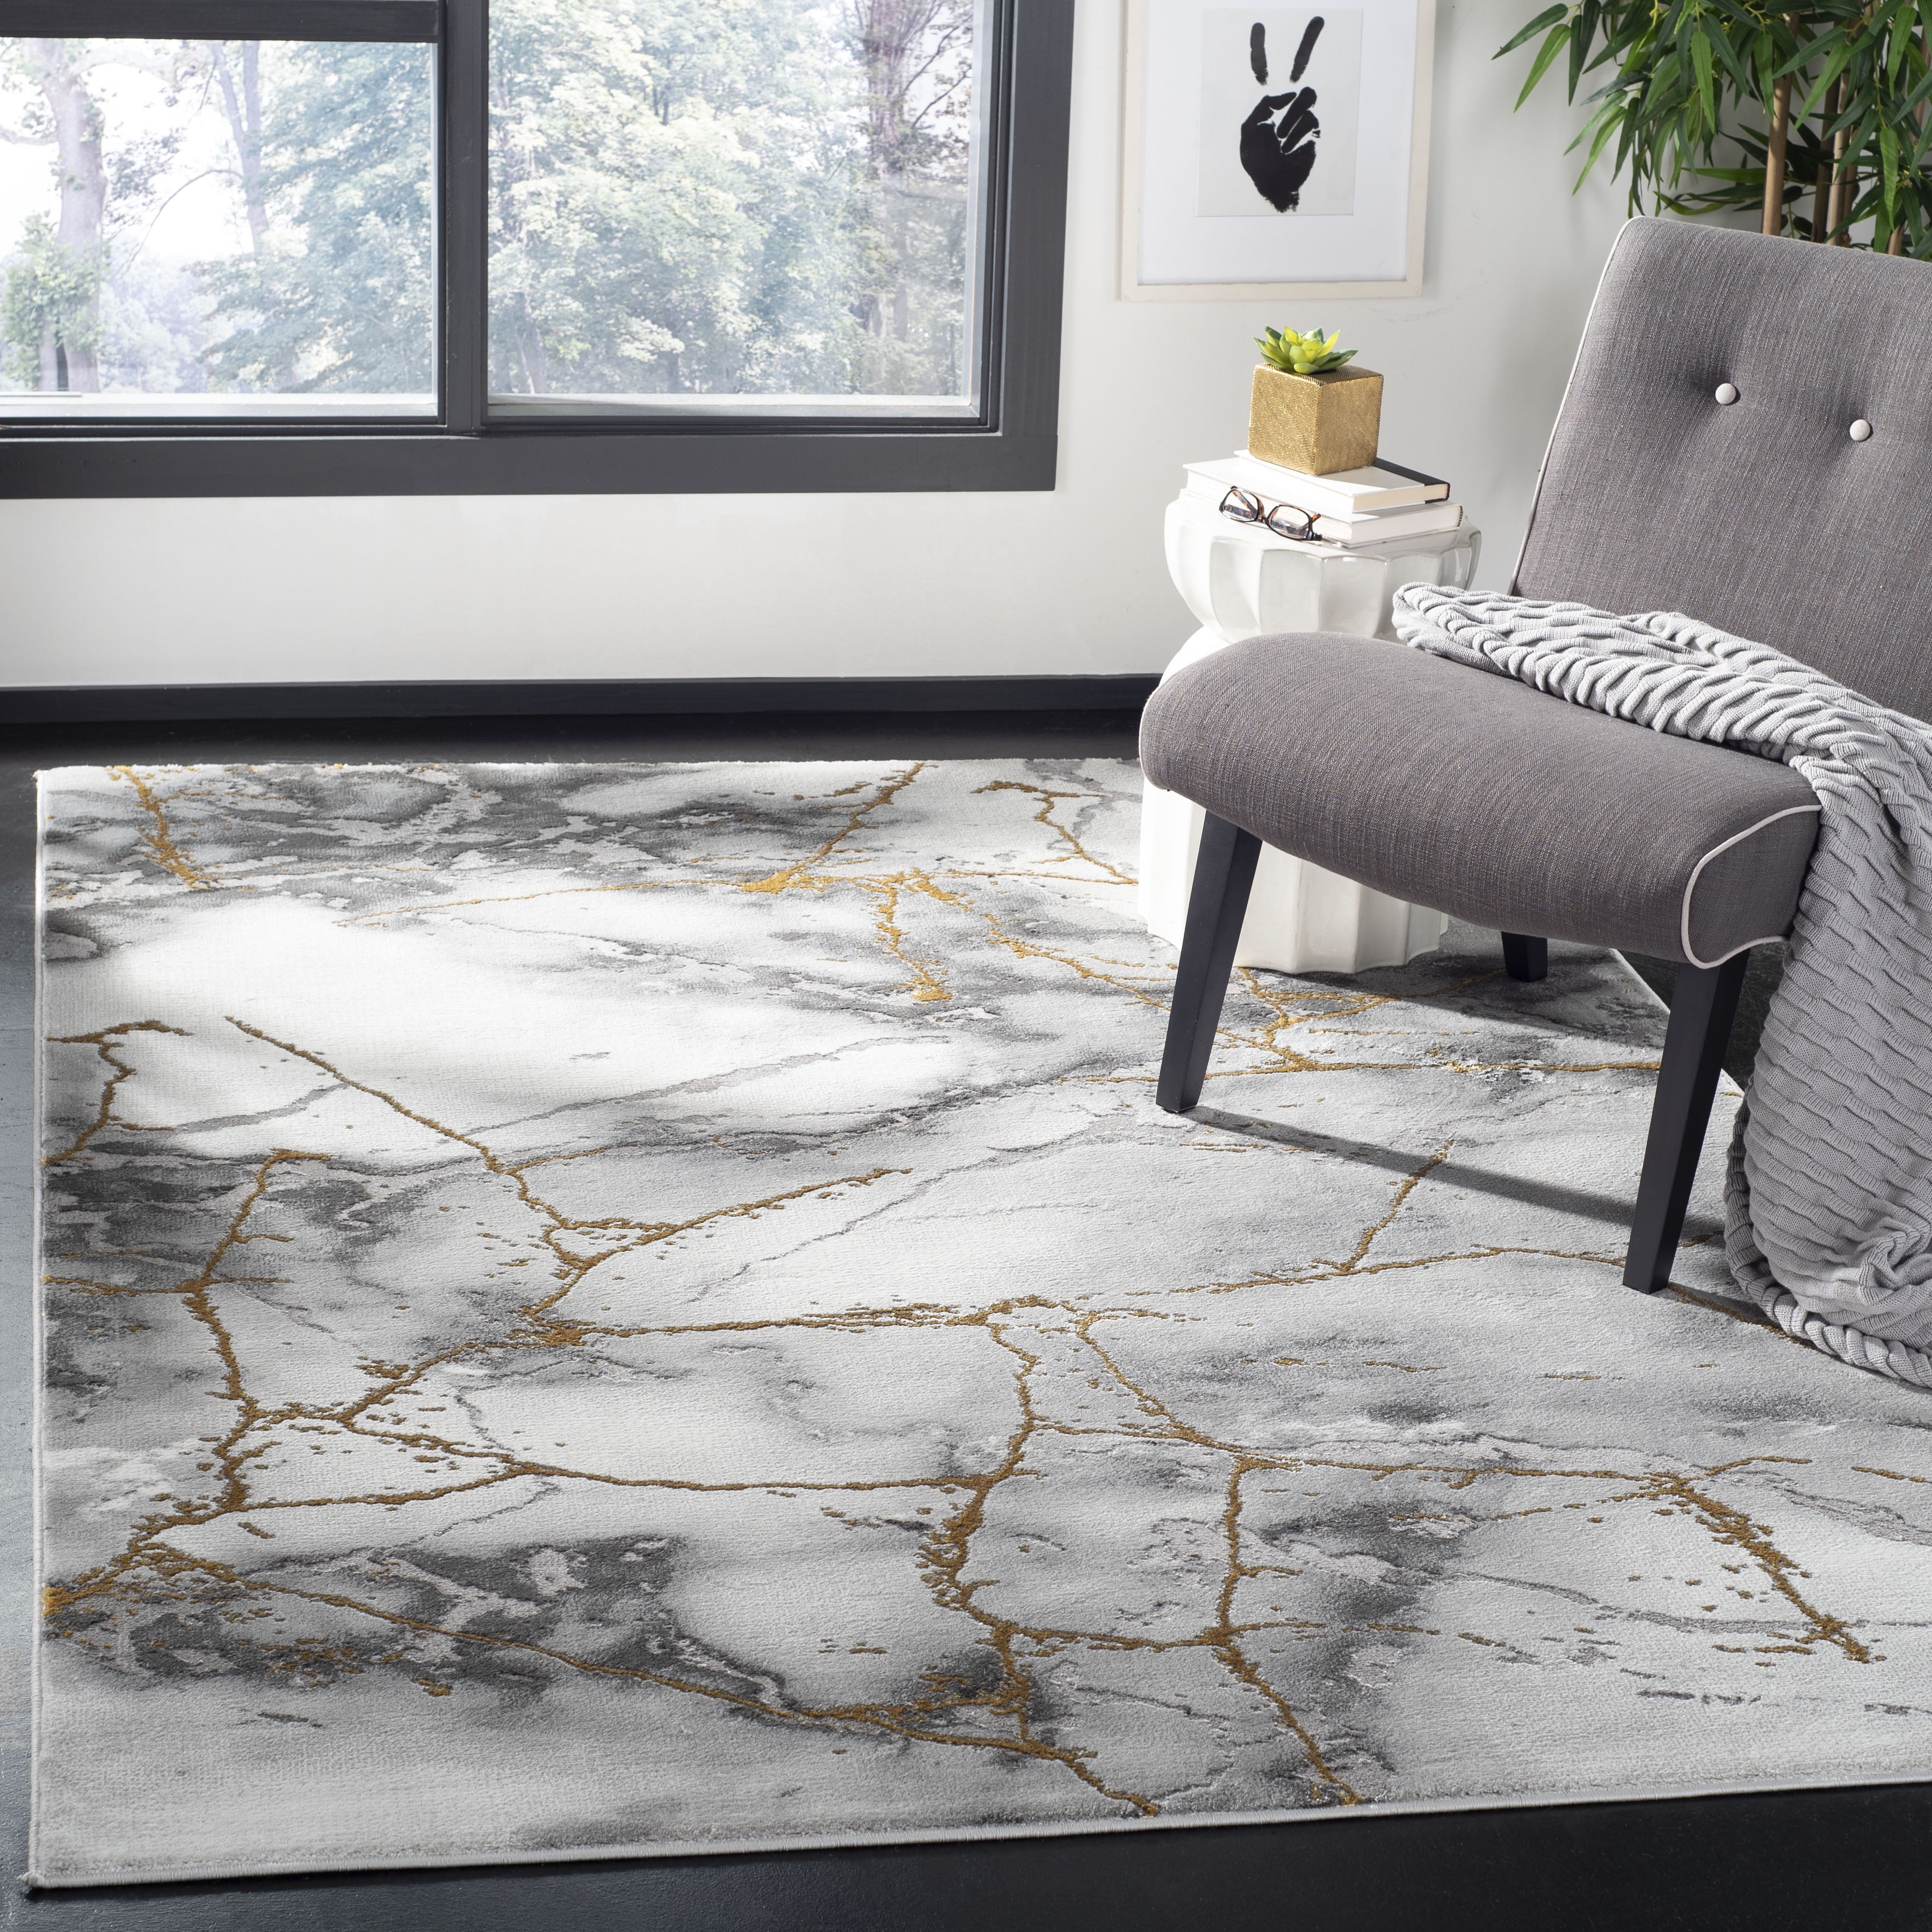 SAFAVIEH Craft Paul Abstract Marble Area Rug, Grey/Gold, 5'3